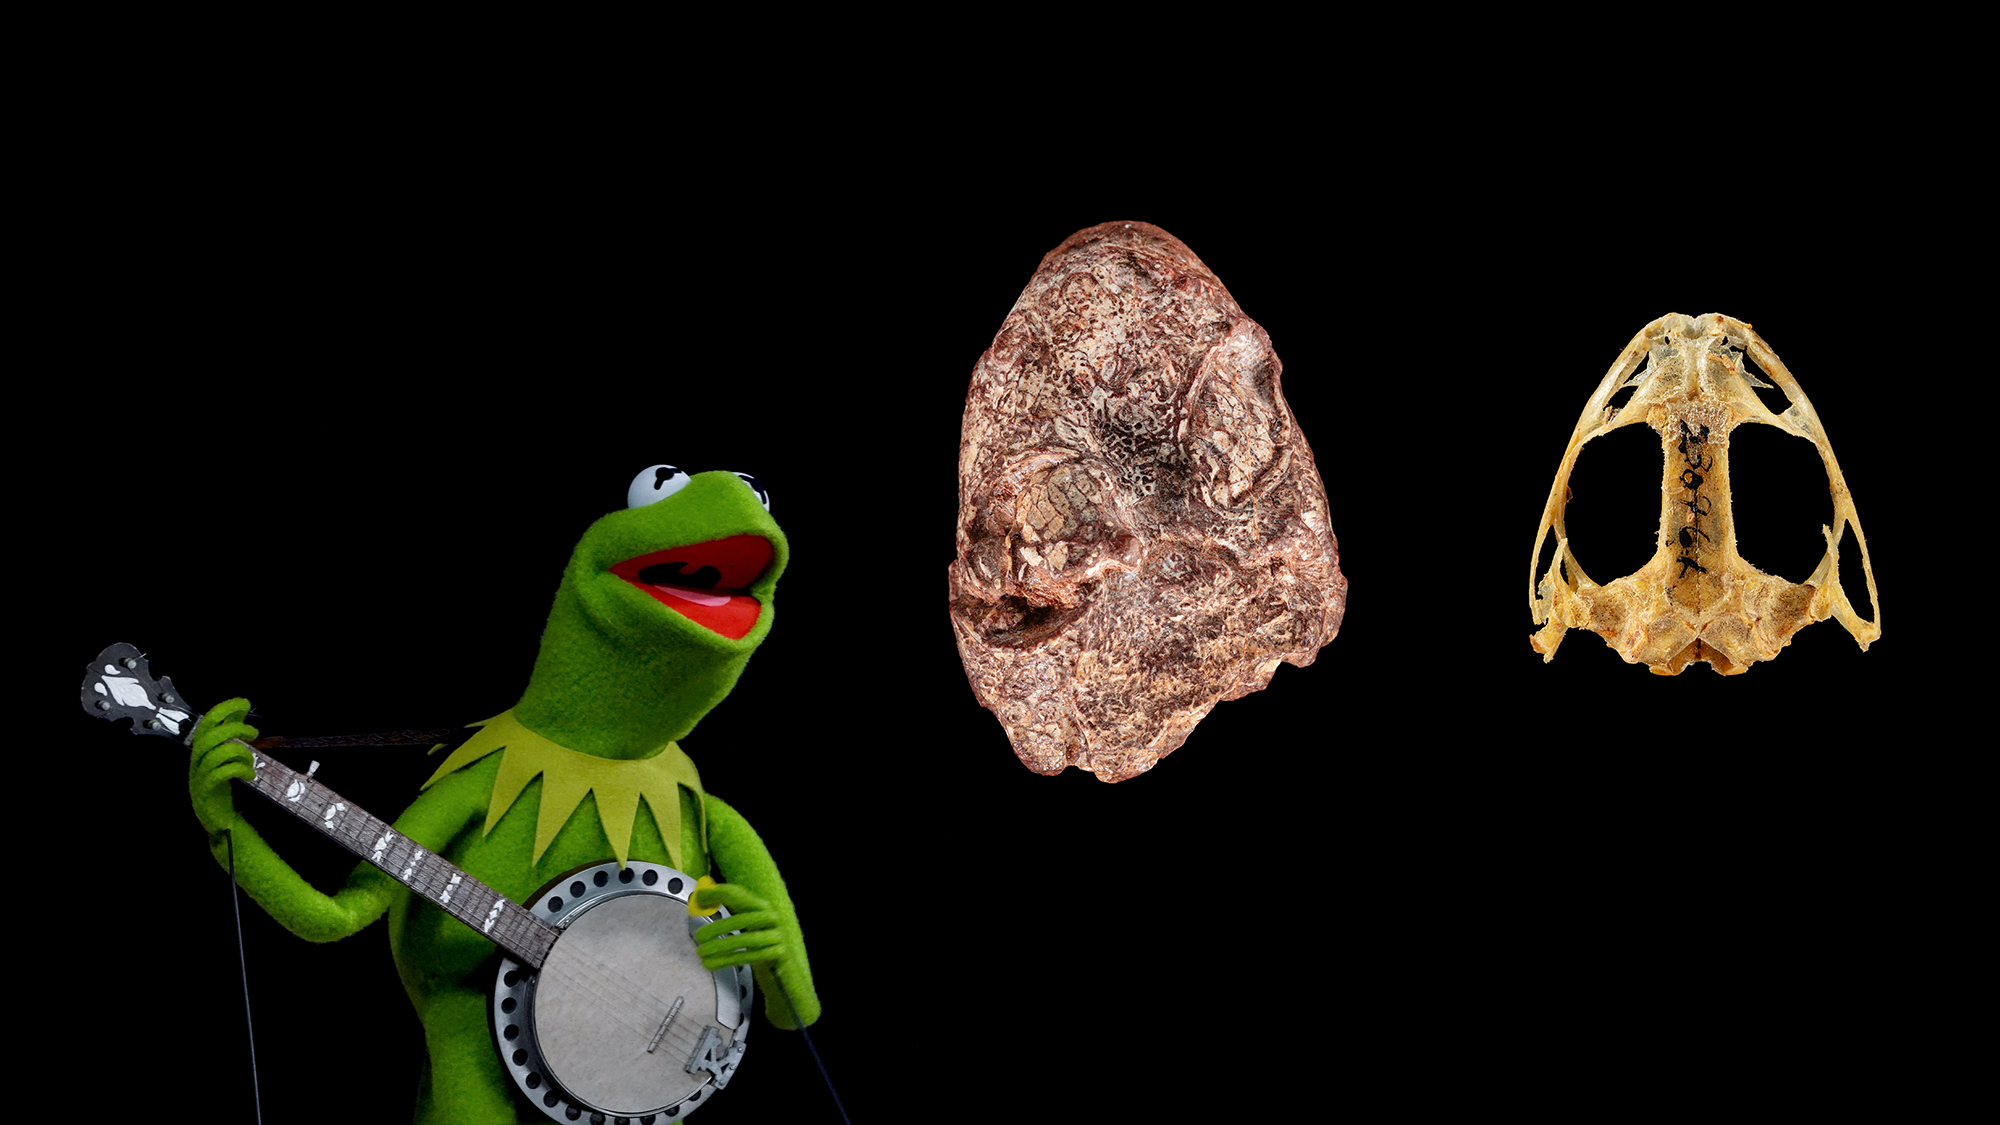 Kermit the Frog strumming the banjo, along with a fossil skull of Kermitops (left) and a modern frog skull (right). Kermitops’ discovery is filling in some major evolutionary gaps for amphibians.